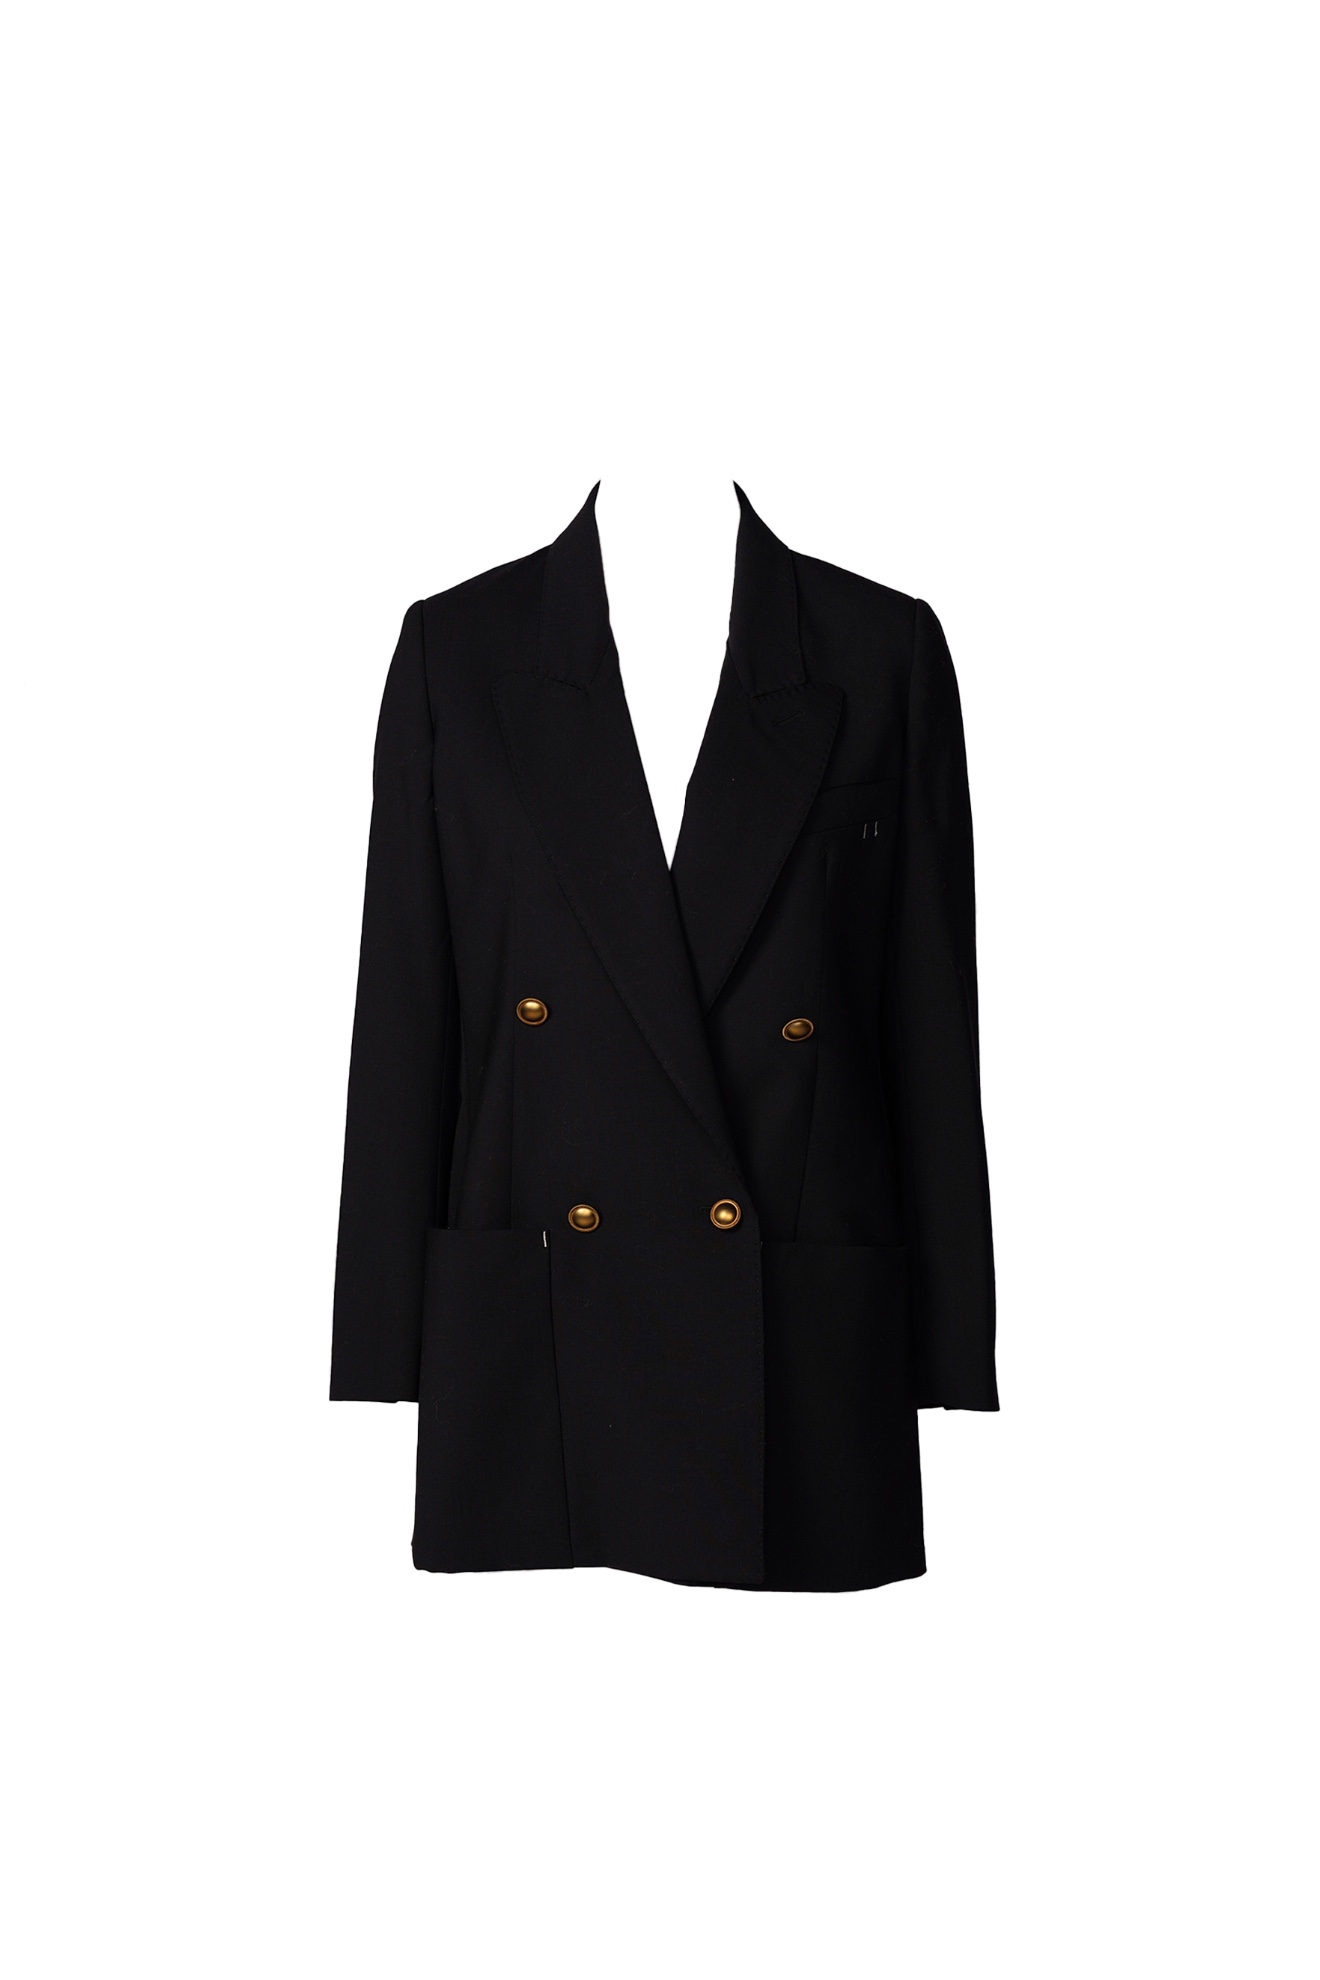 Lorena Antoniazzi Double breasted blazer with large front pockets black 36